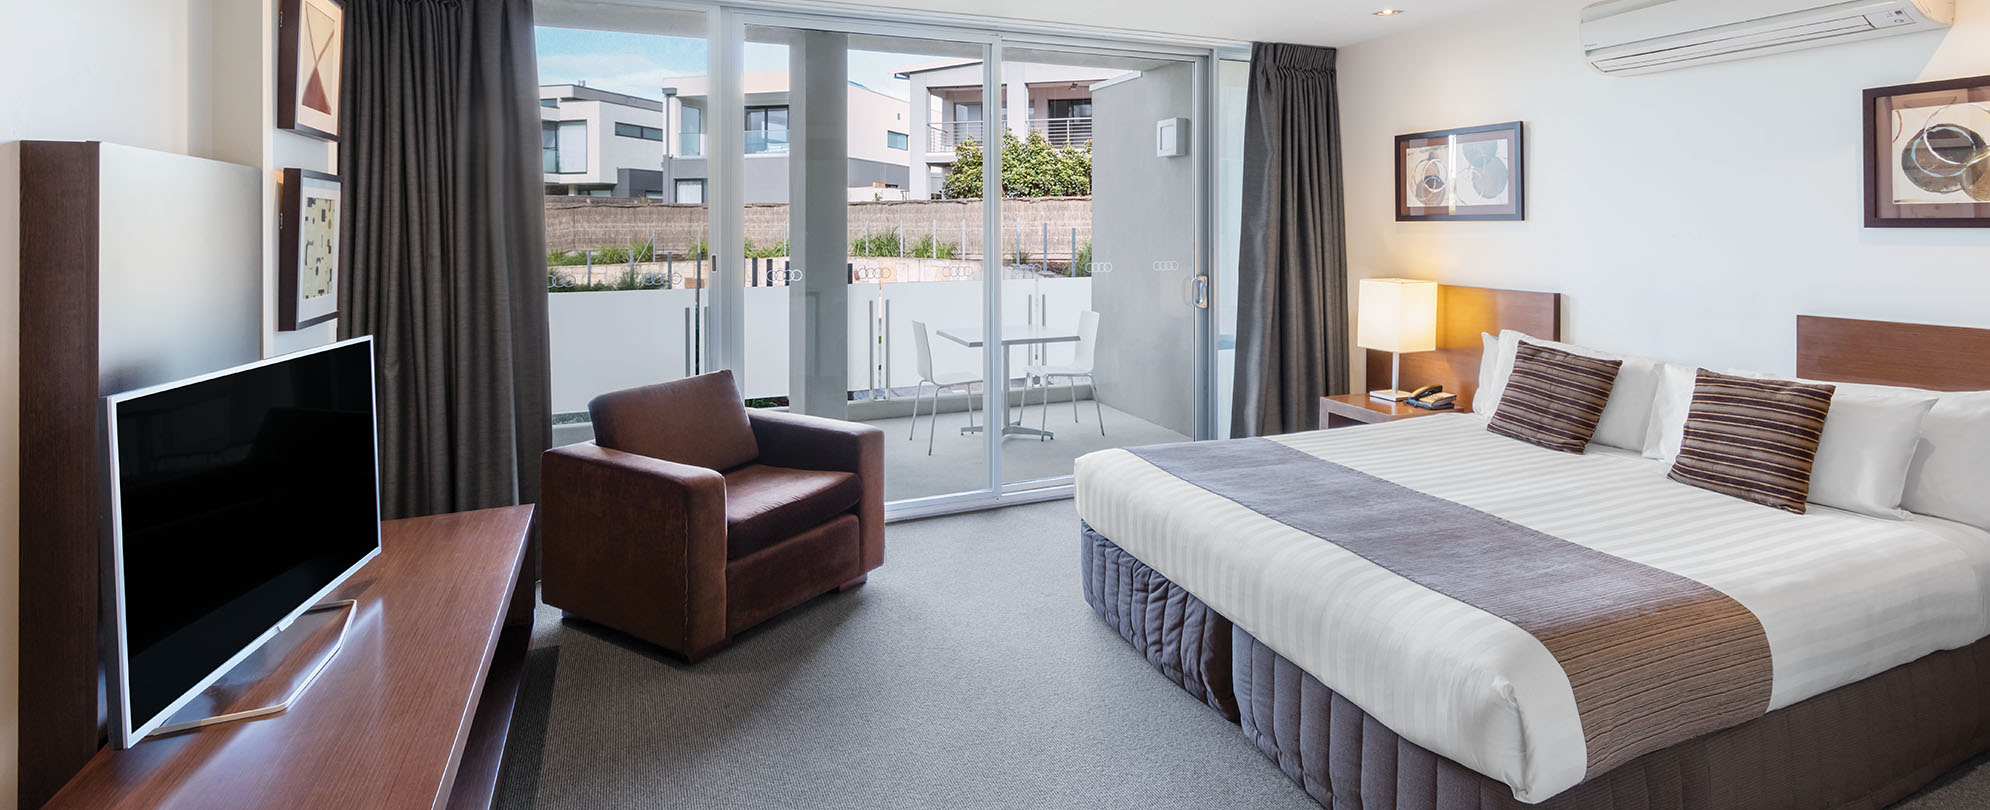 The master bedroom, inside a 1-bedroom accessible suite at Club  Club Wyndham Torquay.Wyndham 